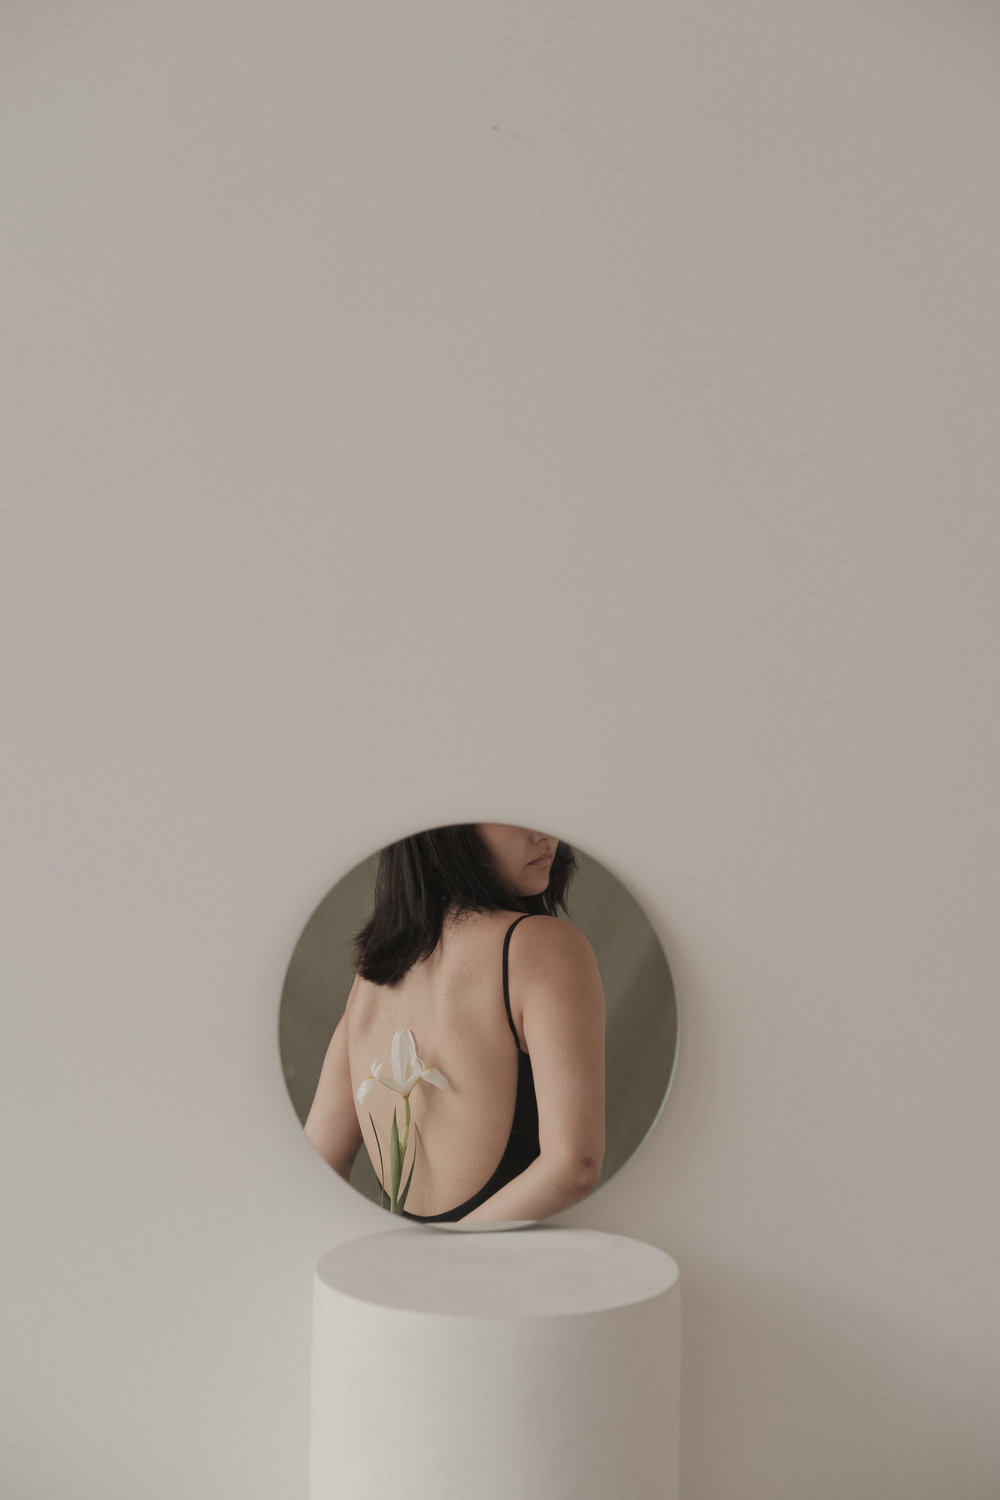 Woman as Seen on Round Mirror